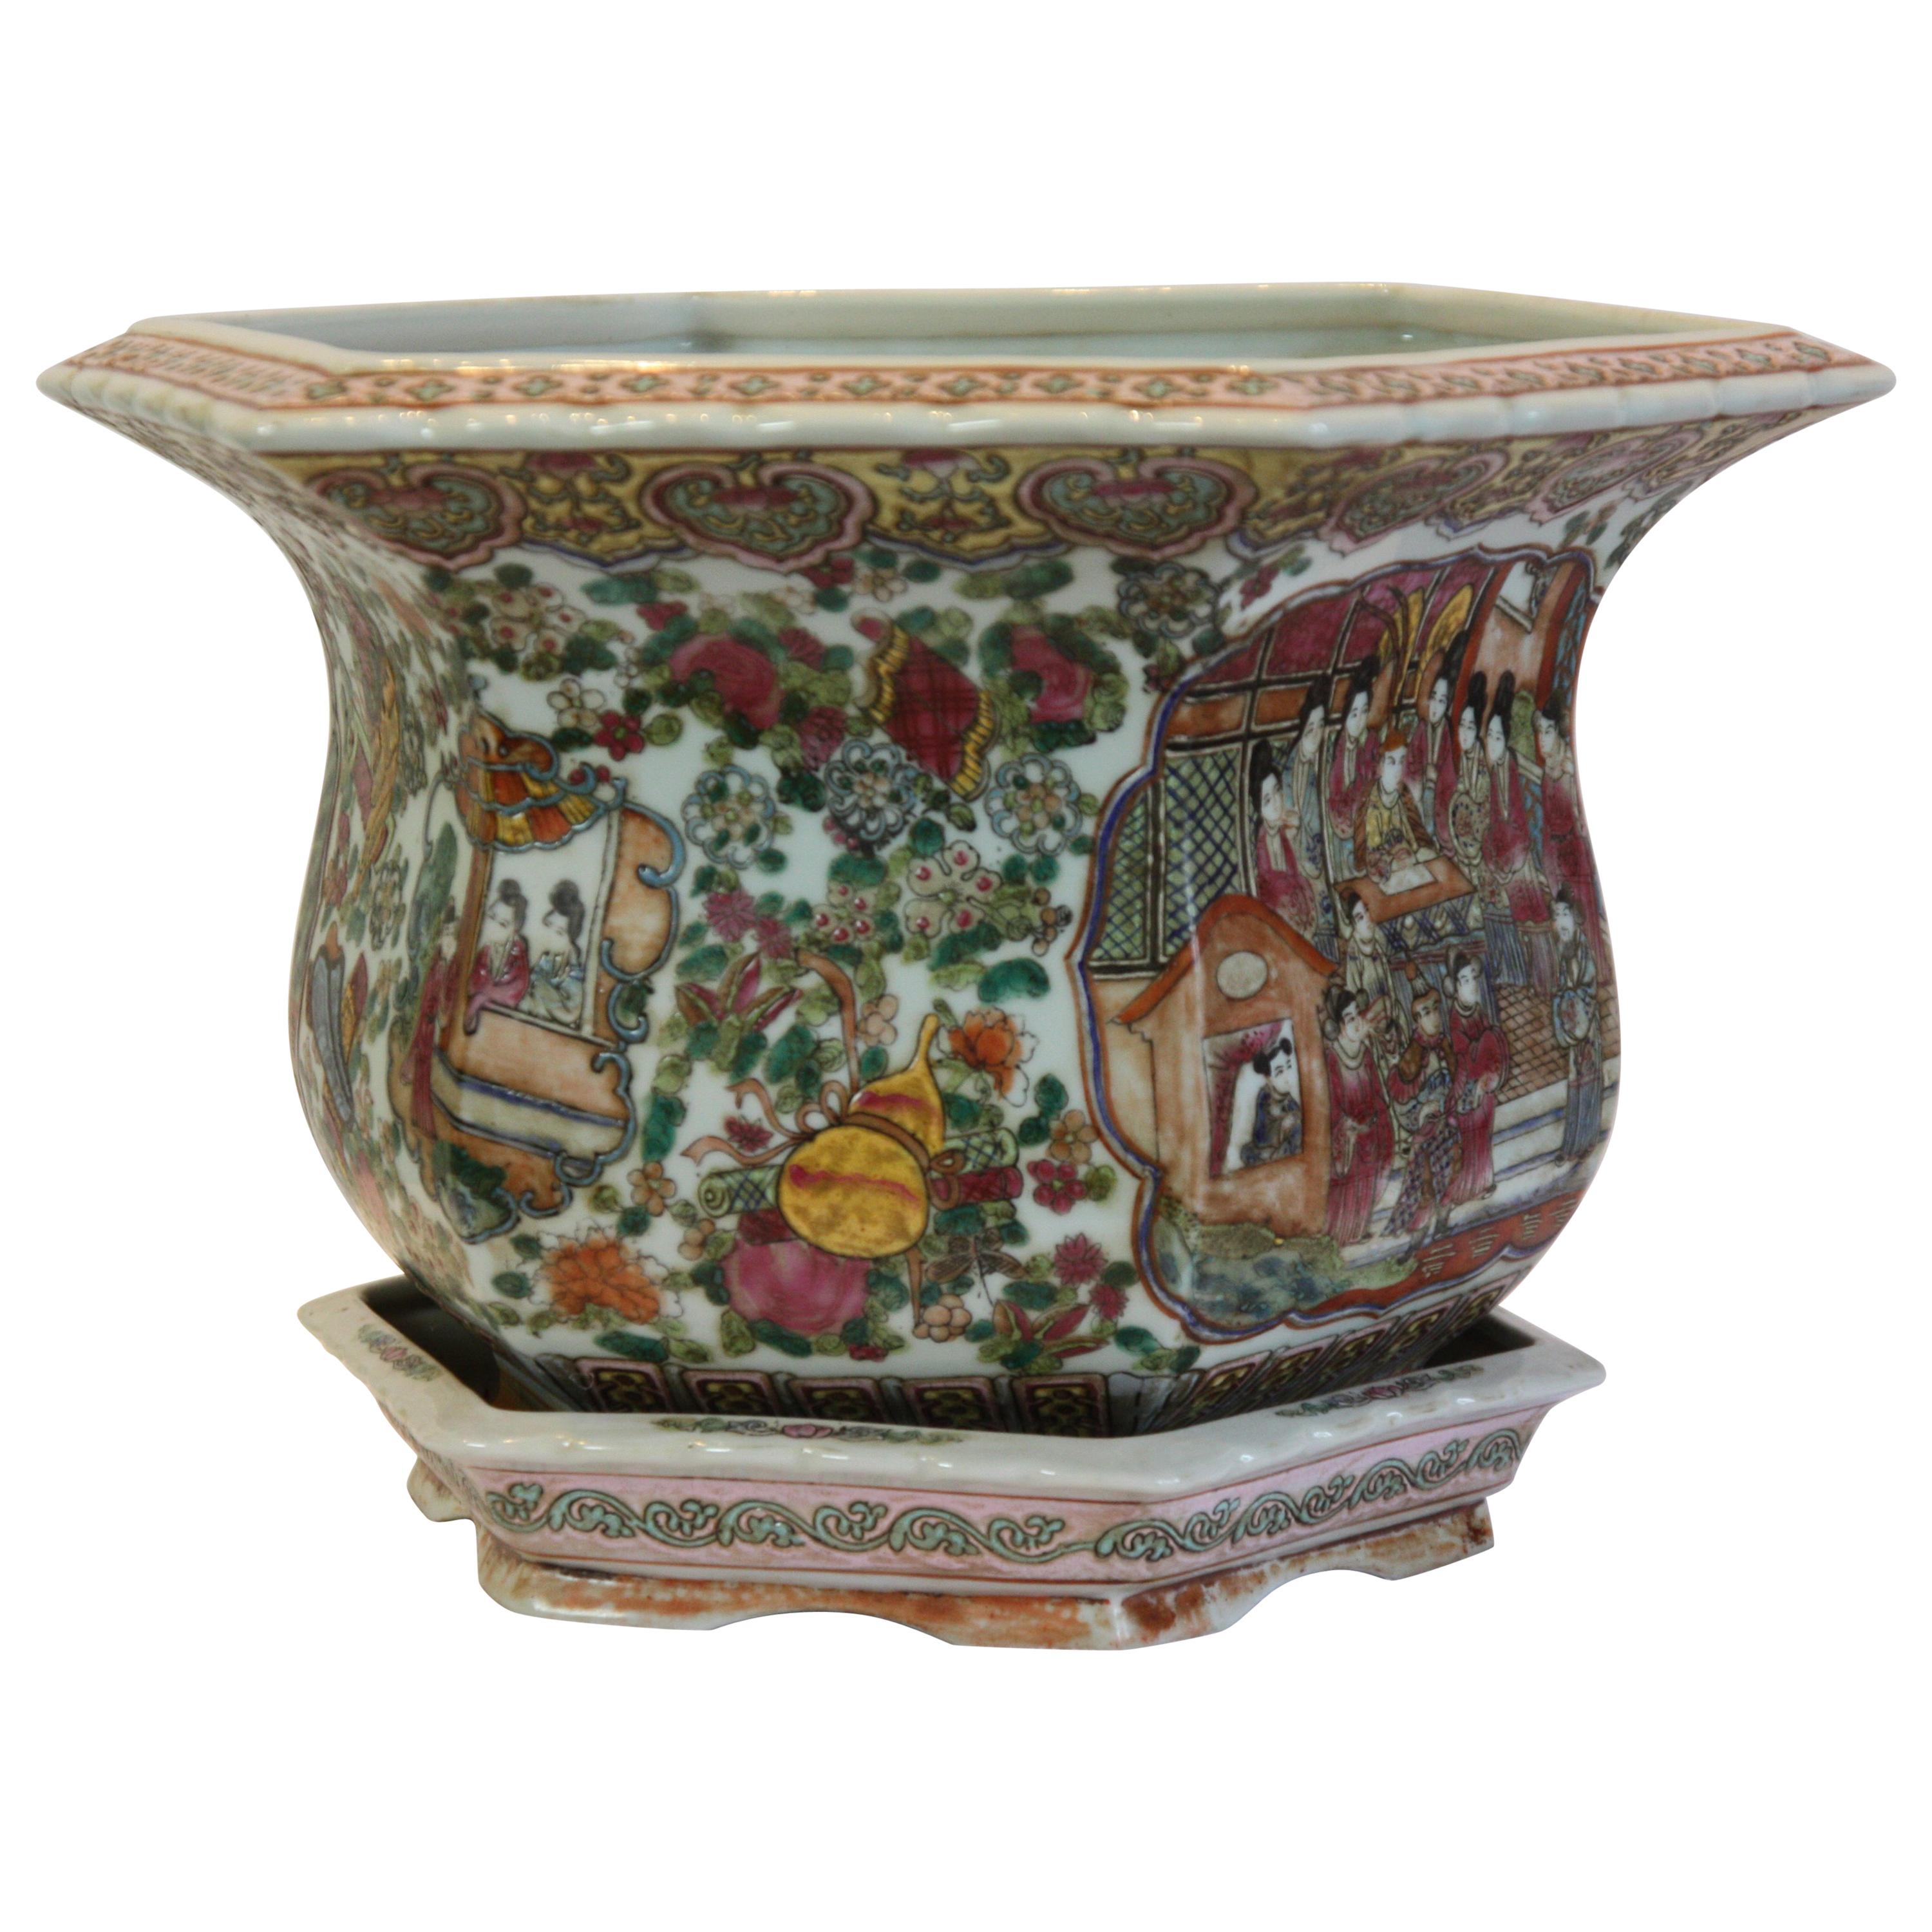 Beautifully Hand-Painted Octagonal Jardinière with Plate